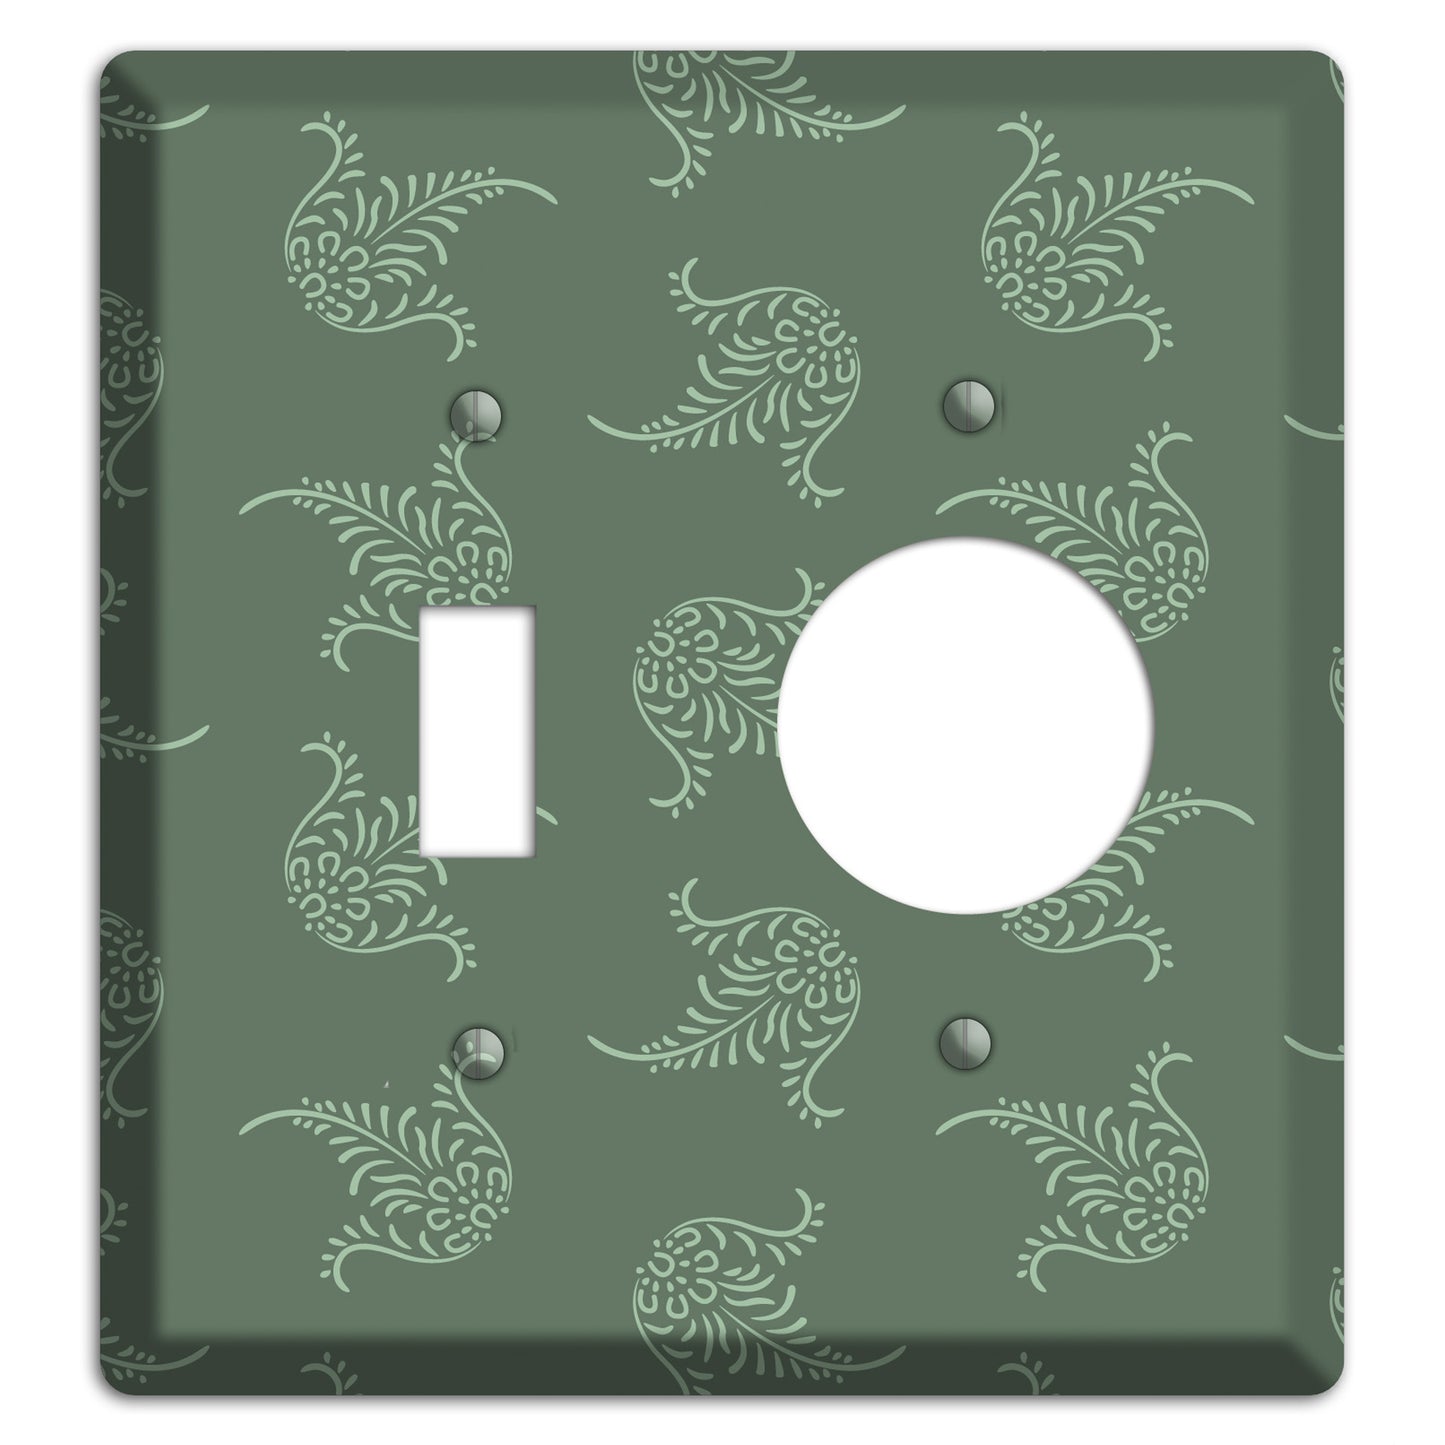 Moss Trefoil Cartouche Toggle / Receptacle Wallplate